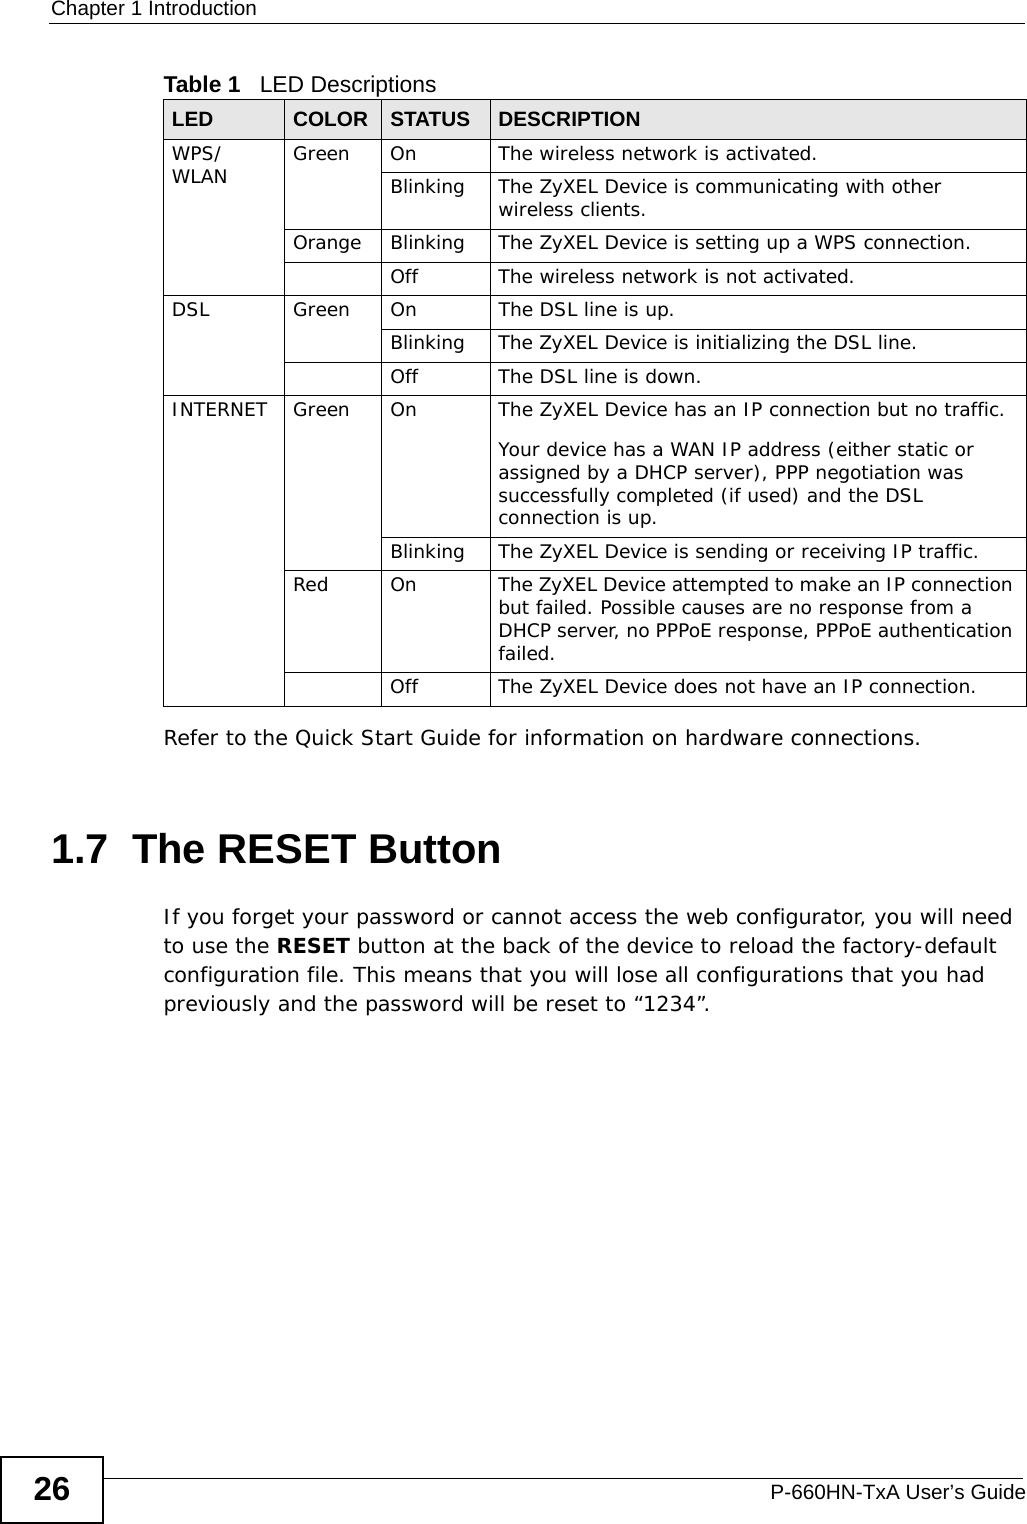 Chapter 1 IntroductionP-660HN-TxA User’s Guide26Refer to the Quick Start Guide for information on hardware connections. 1.7  The RESET ButtonIf you forget your password or cannot access the web configurator, you will need to use the RESET button at the back of the device to reload the factory-default configuration file. This means that you will lose all configurations that you had previously and the password will be reset to “1234”. WPS/WLAN Green On The wireless network is activated.Blinking The ZyXEL Device is communicating with other wireless clients.Orange Blinking The ZyXEL Device is setting up a WPS connection.Off The wireless network is not activated.DSL Green On The DSL line is up.Blinking The ZyXEL Device is initializing the DSL line.Off The DSL line is down.INTERNET Green On The ZyXEL Device has an IP connection but no traffic.Your device has a WAN IP address (either static or assigned by a DHCP server), PPP negotiation was successfully completed (if used) and the DSL connection is up.Blinking The ZyXEL Device is sending or receiving IP traffic.Red On The ZyXEL Device attempted to make an IP connection but failed. Possible causes are no response from a DHCP server, no PPPoE response, PPPoE authentication failed.Off The ZyXEL Device does not have an IP connection.Table 1   LED DescriptionsLED COLOR STATUS DESCRIPTION